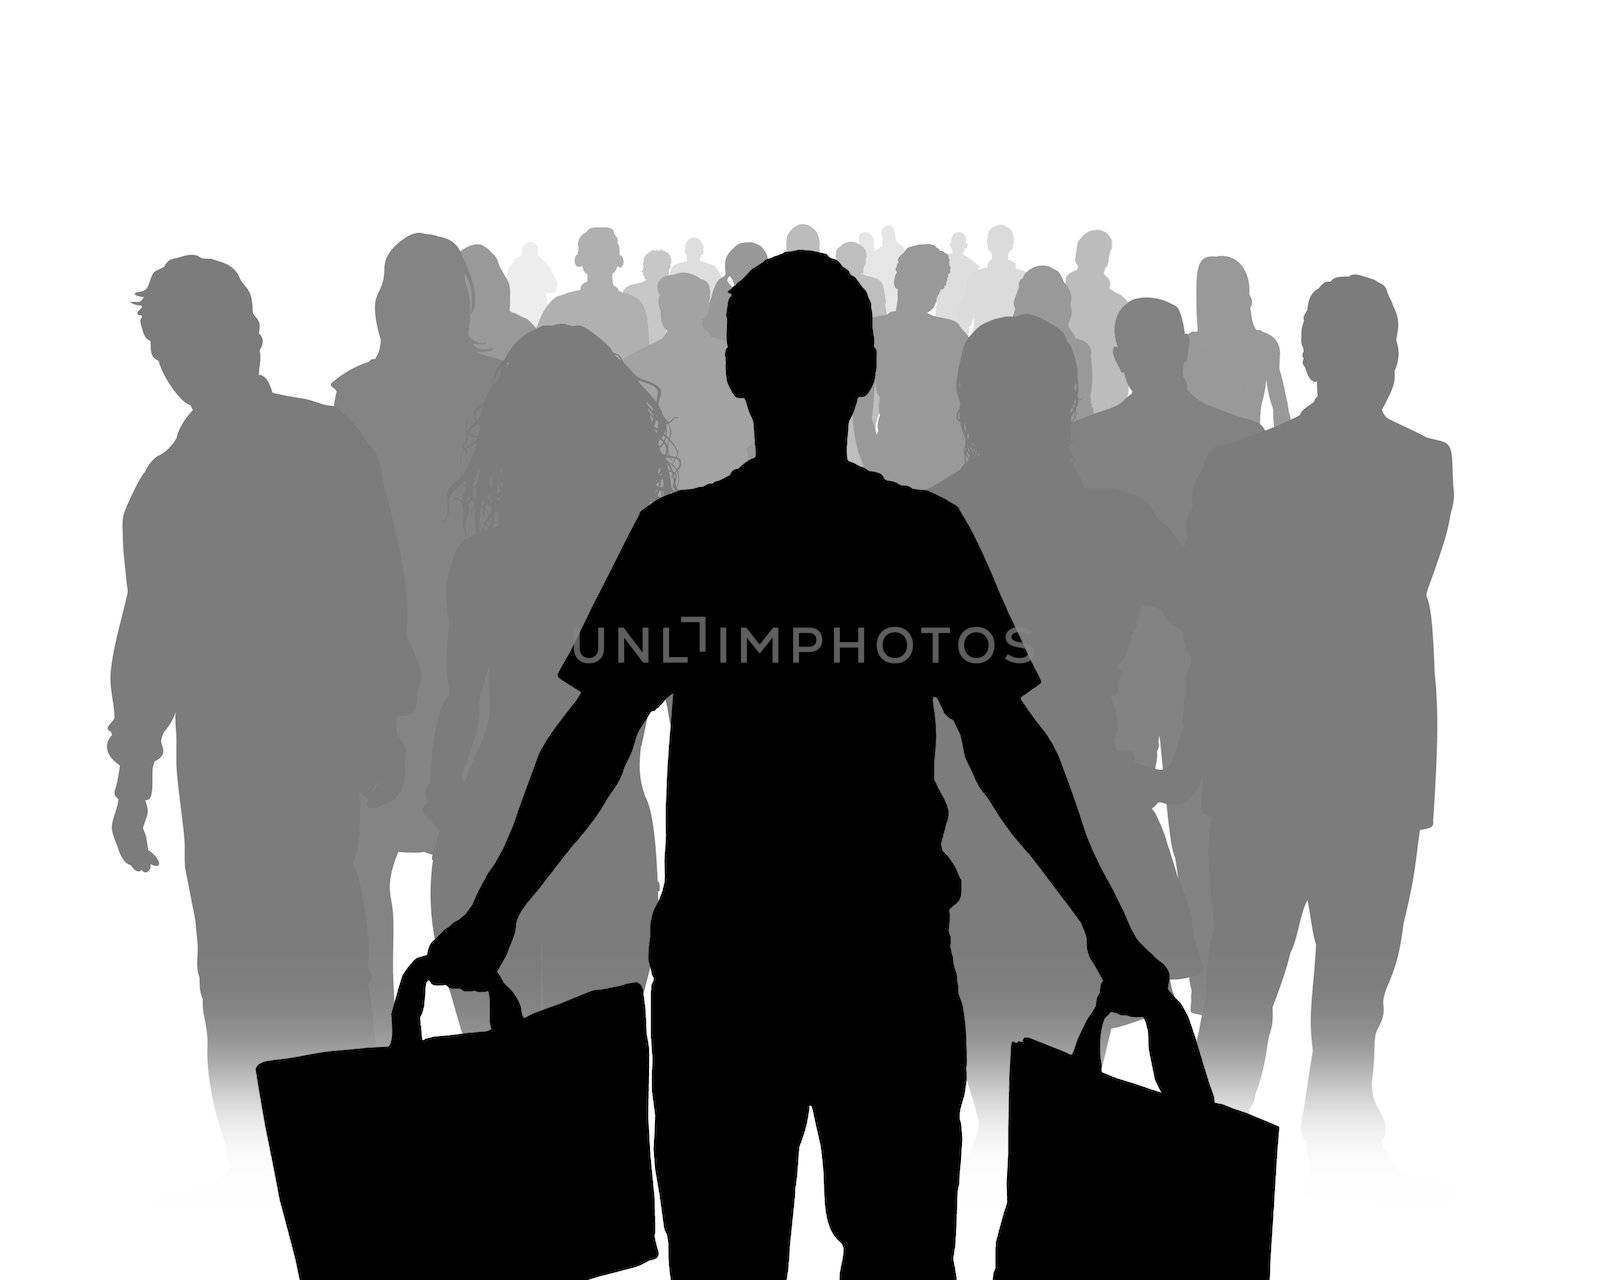 Illustration of a person standing at the front of a crowd, holding bags